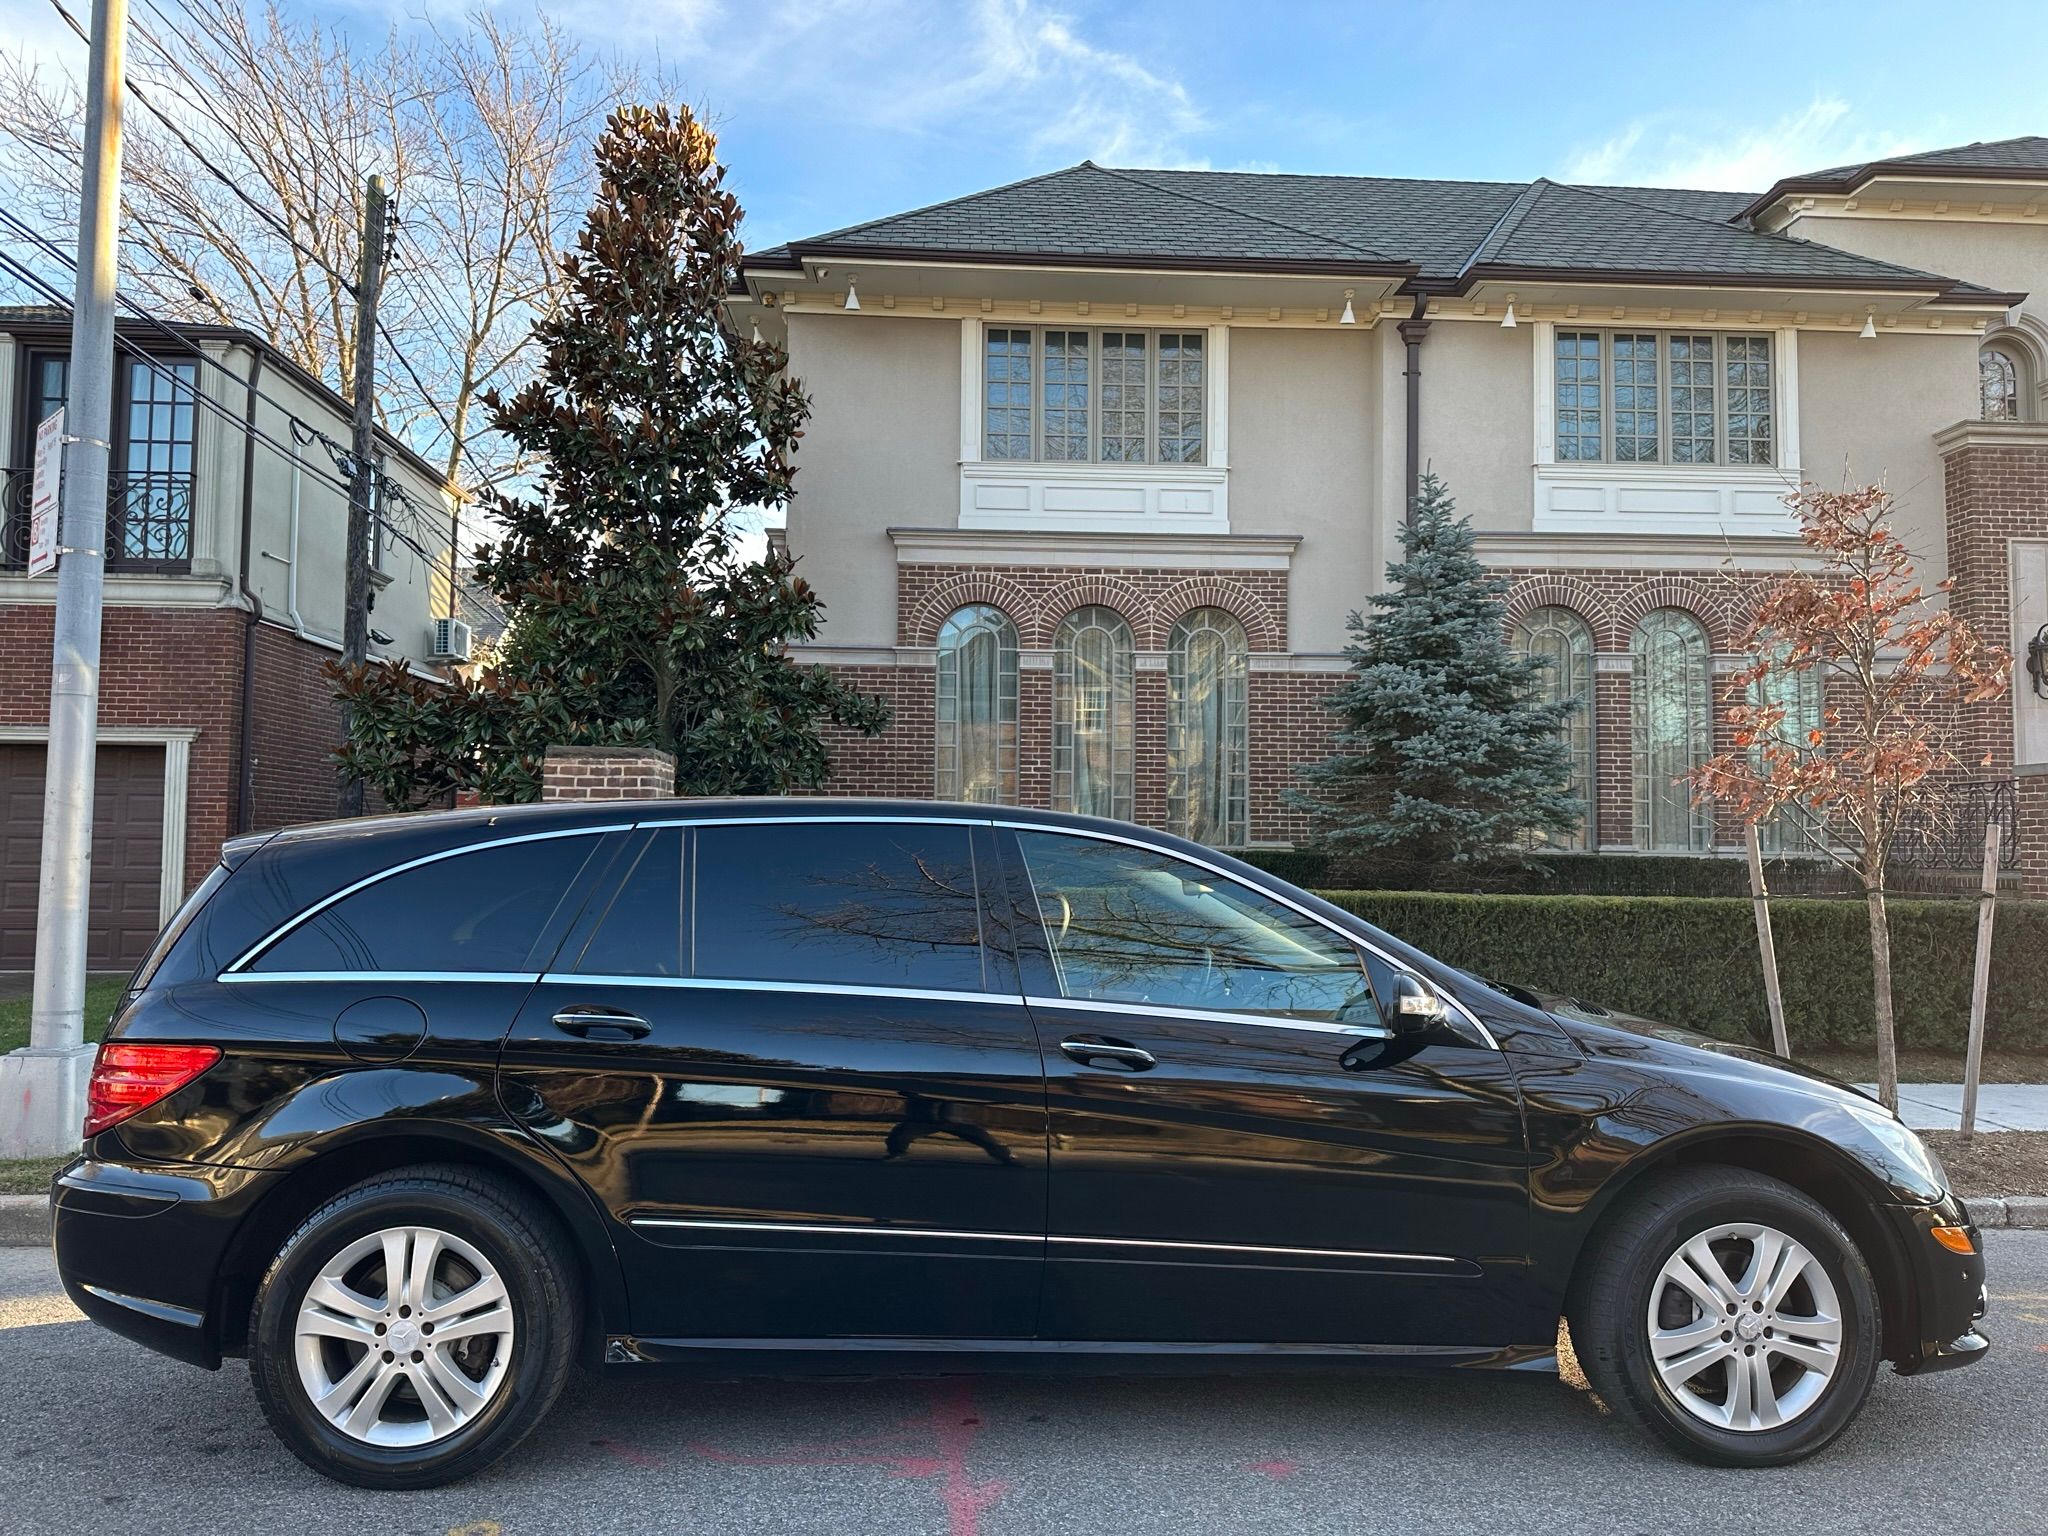 Used 2008 Mercedes-Benz R-Class for Sale Near Me | Cars.com